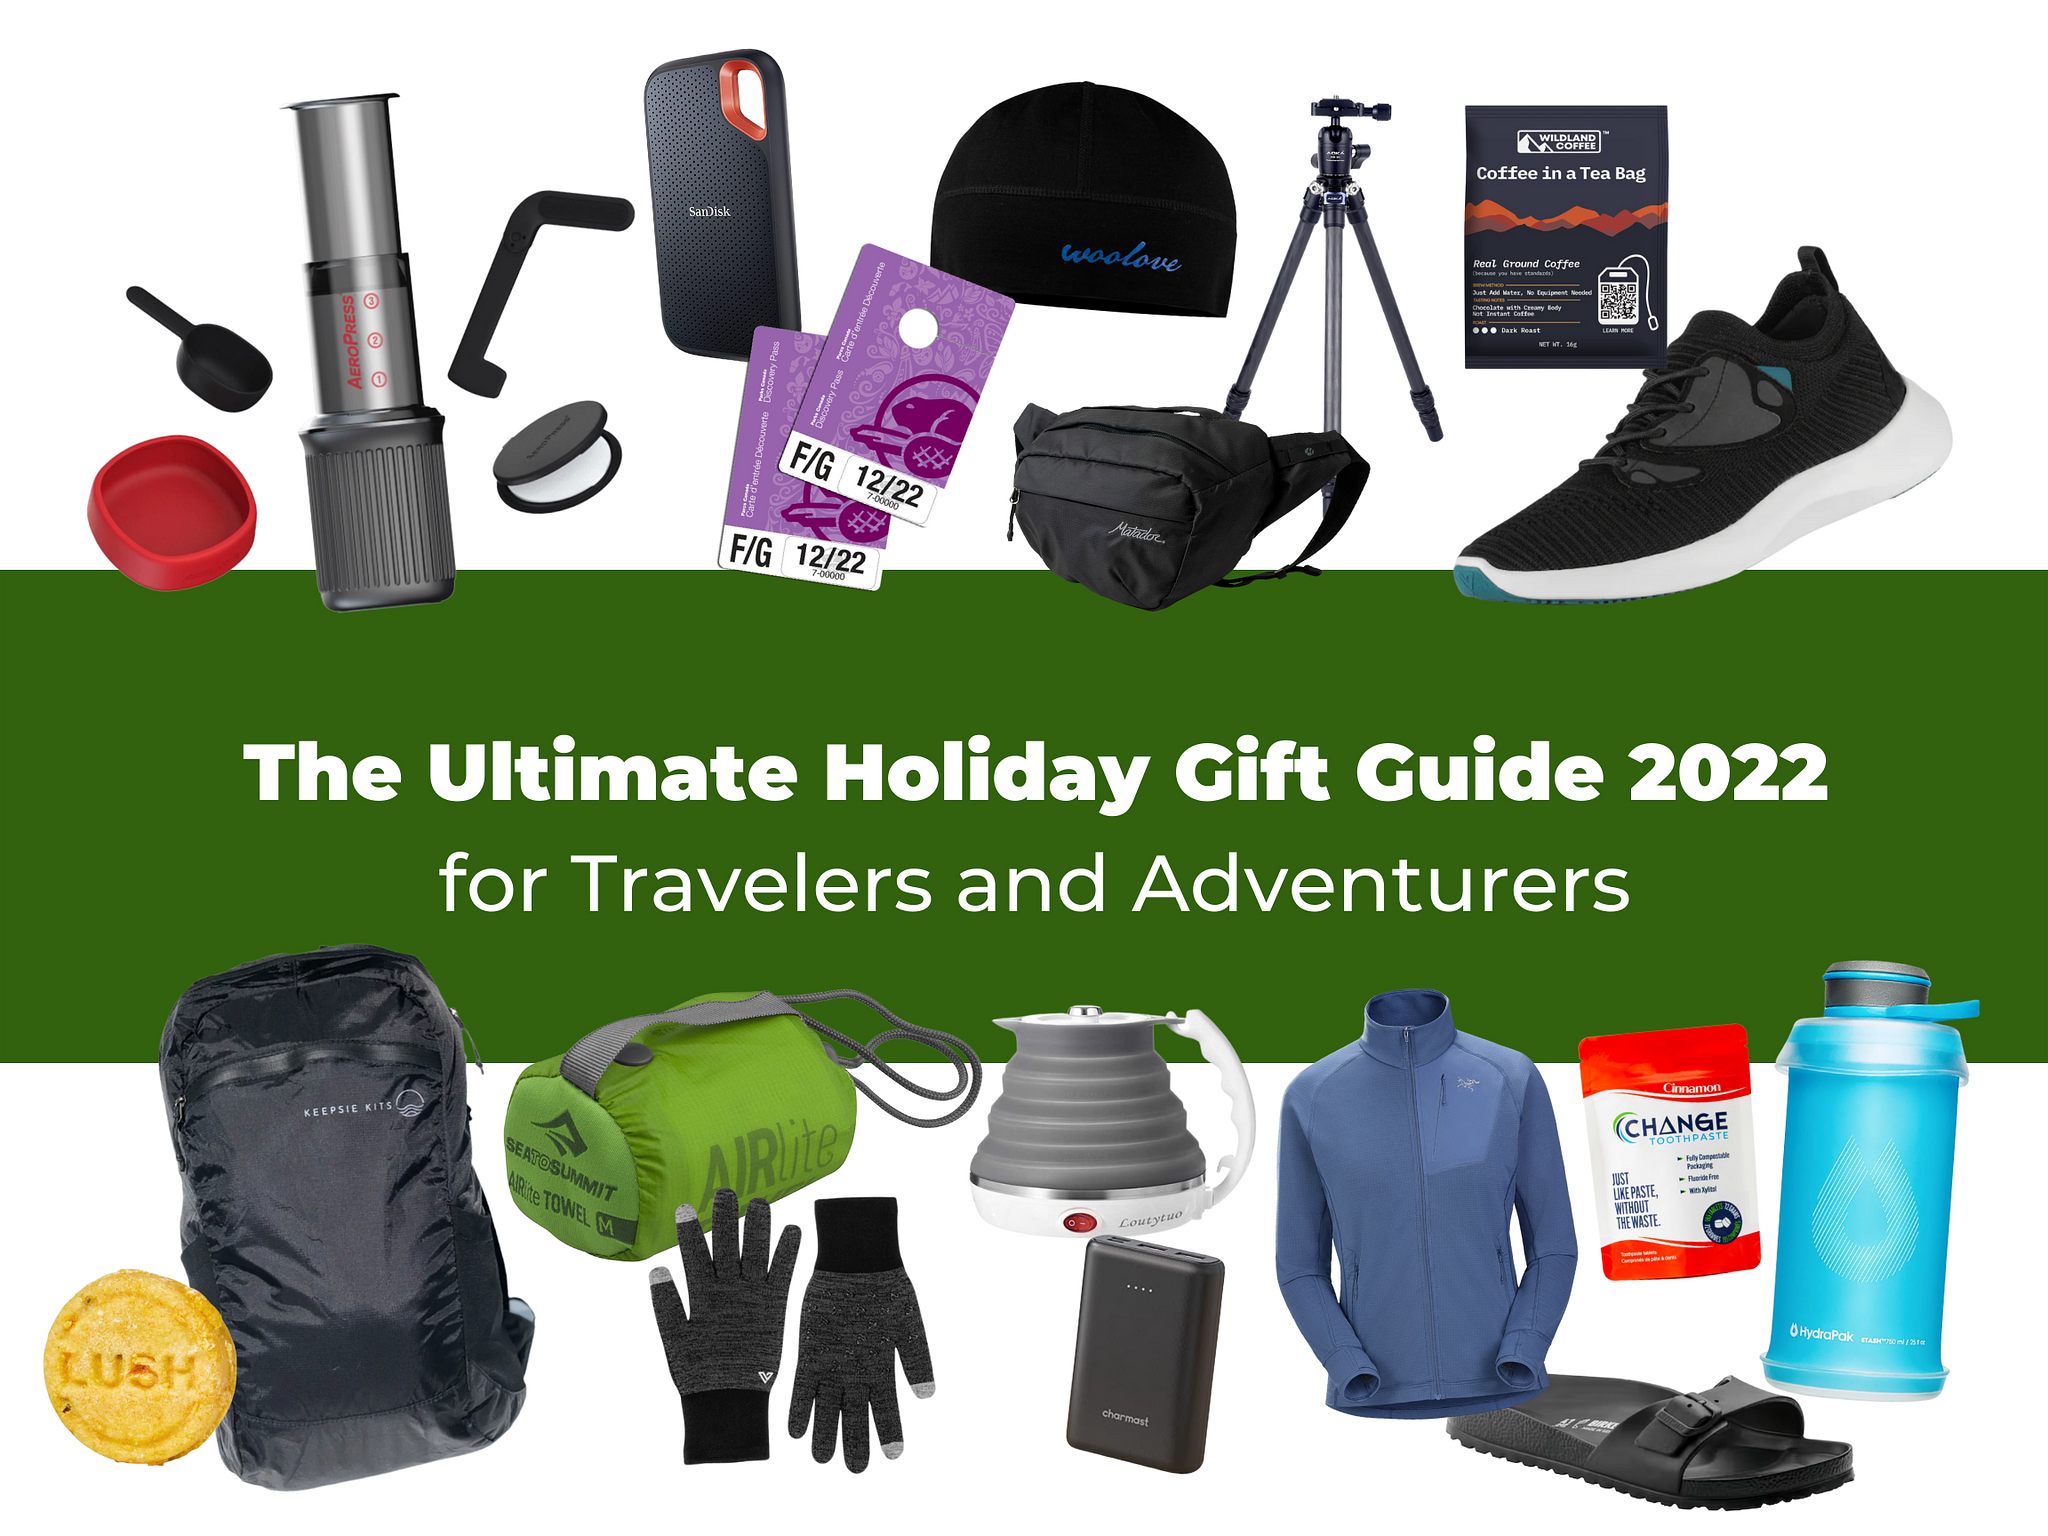 The Ultimate Holiday Gift Guide 2022 for Travelers and Adventurers